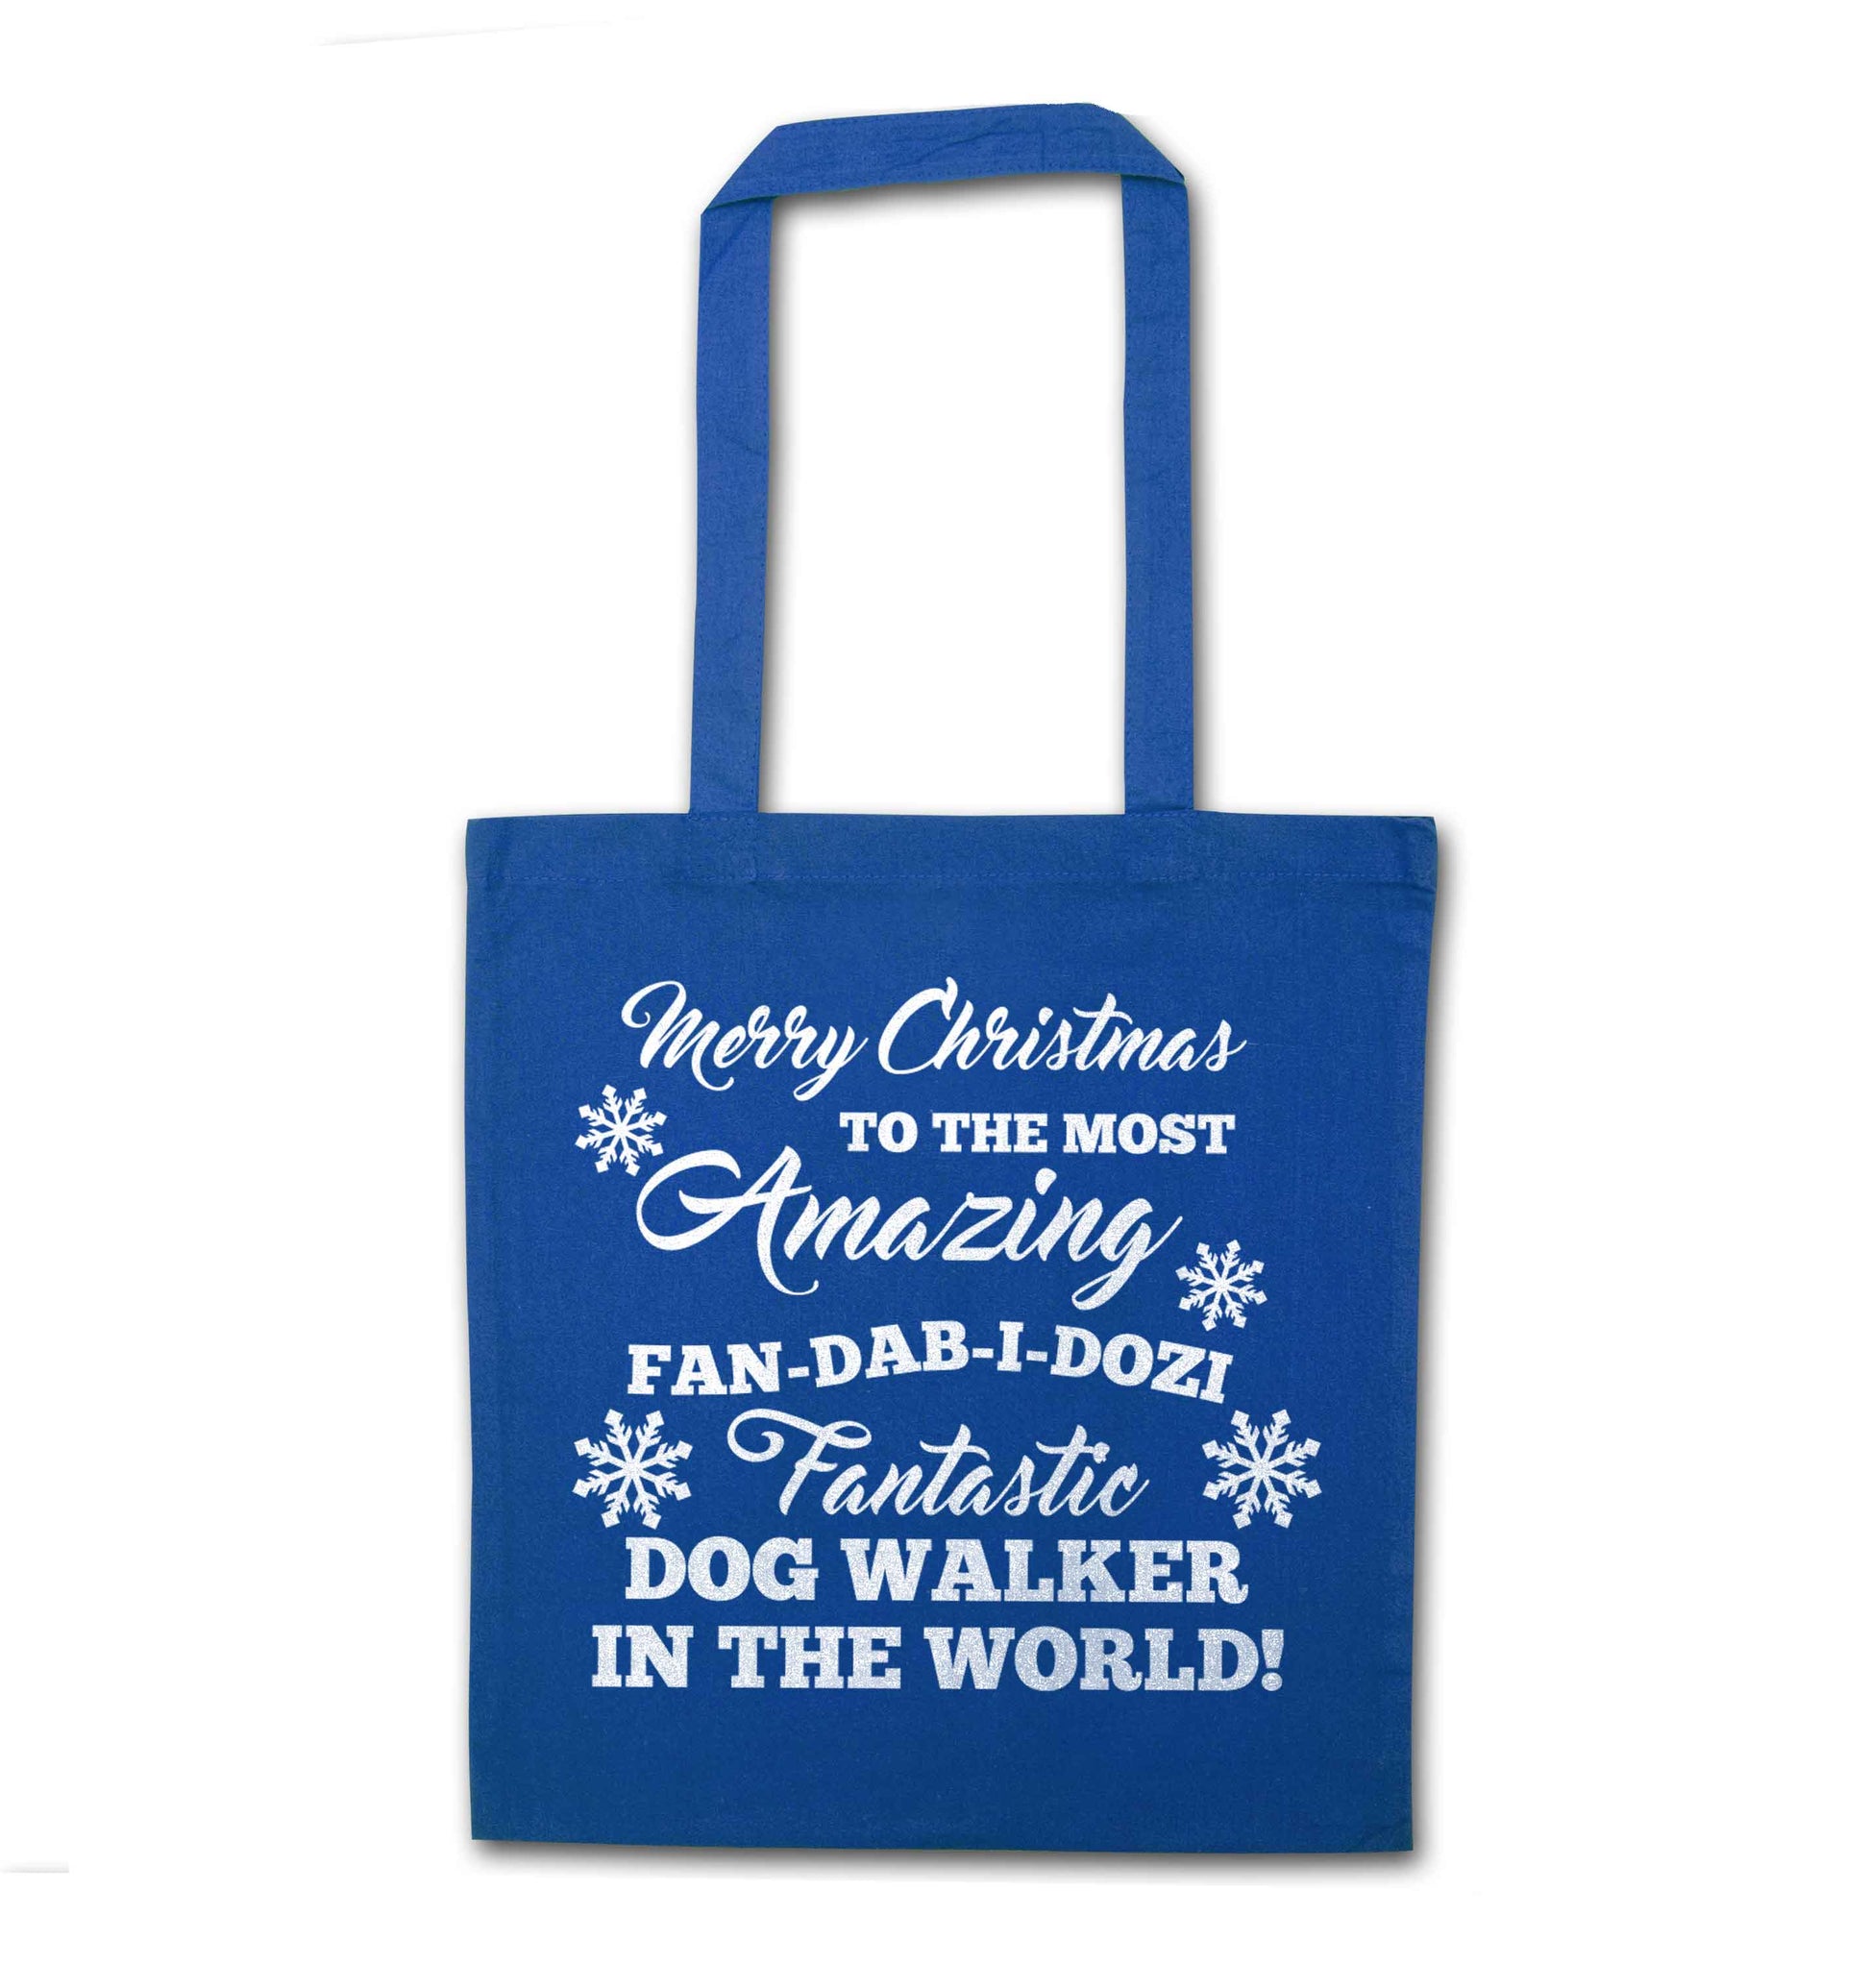 Merry Christmas to the most amazing fan-dab-i-dozi fantasic dog walker in the world blue tote bag